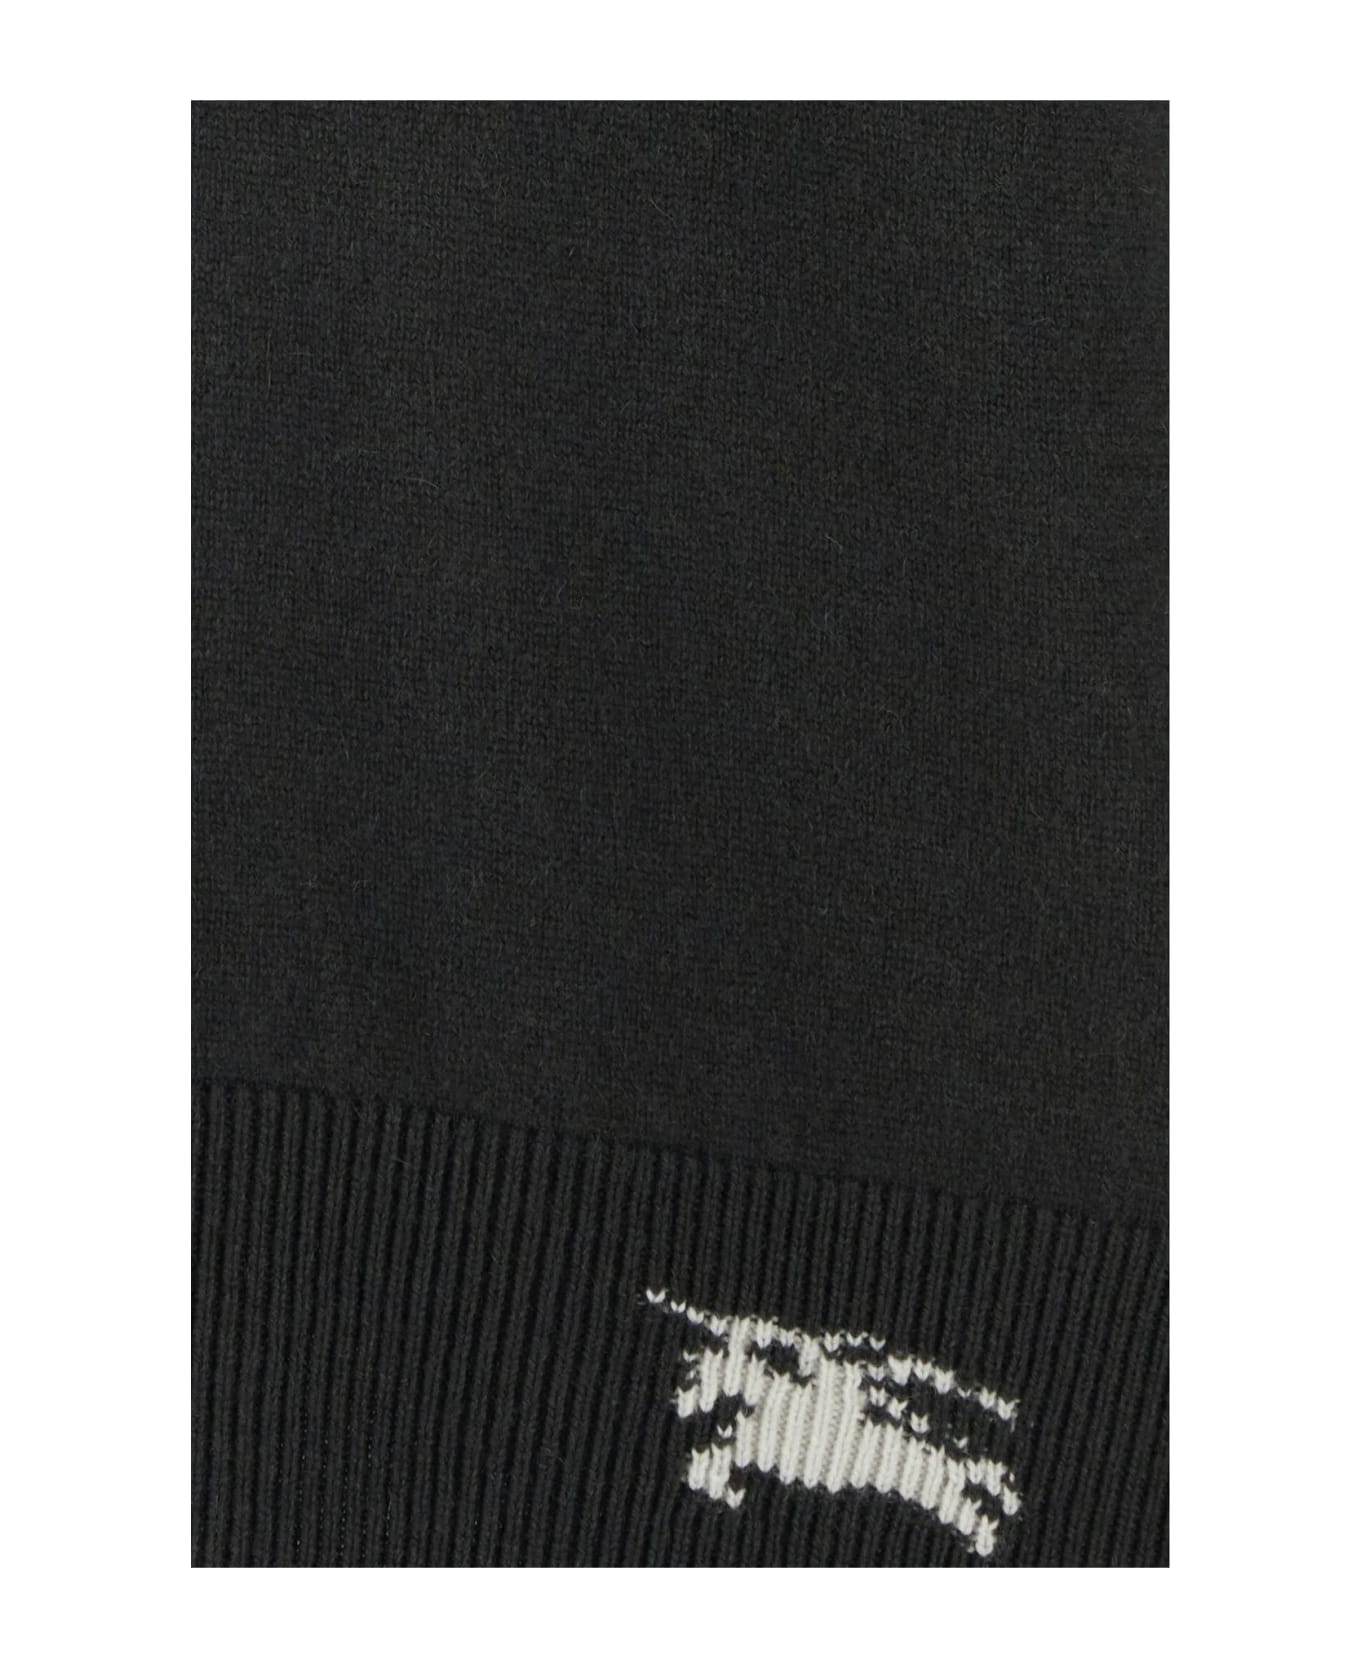 Burberry Anthracite Cashmere Sweater - Onyx ニットウェア